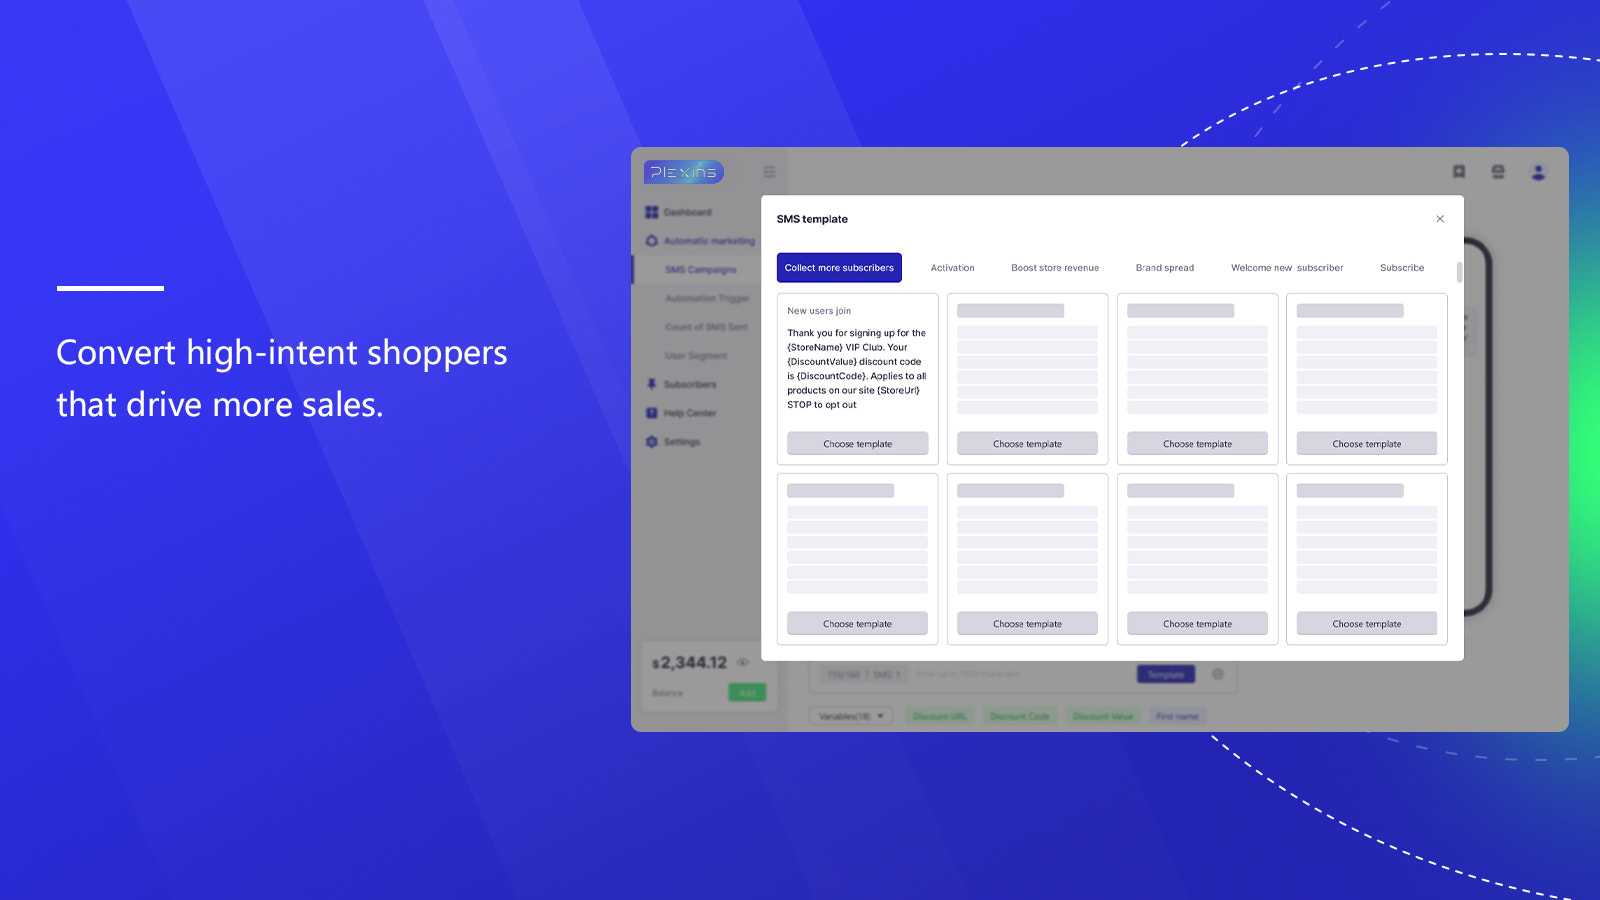 Convert high-intent shoppers that drive more sales.